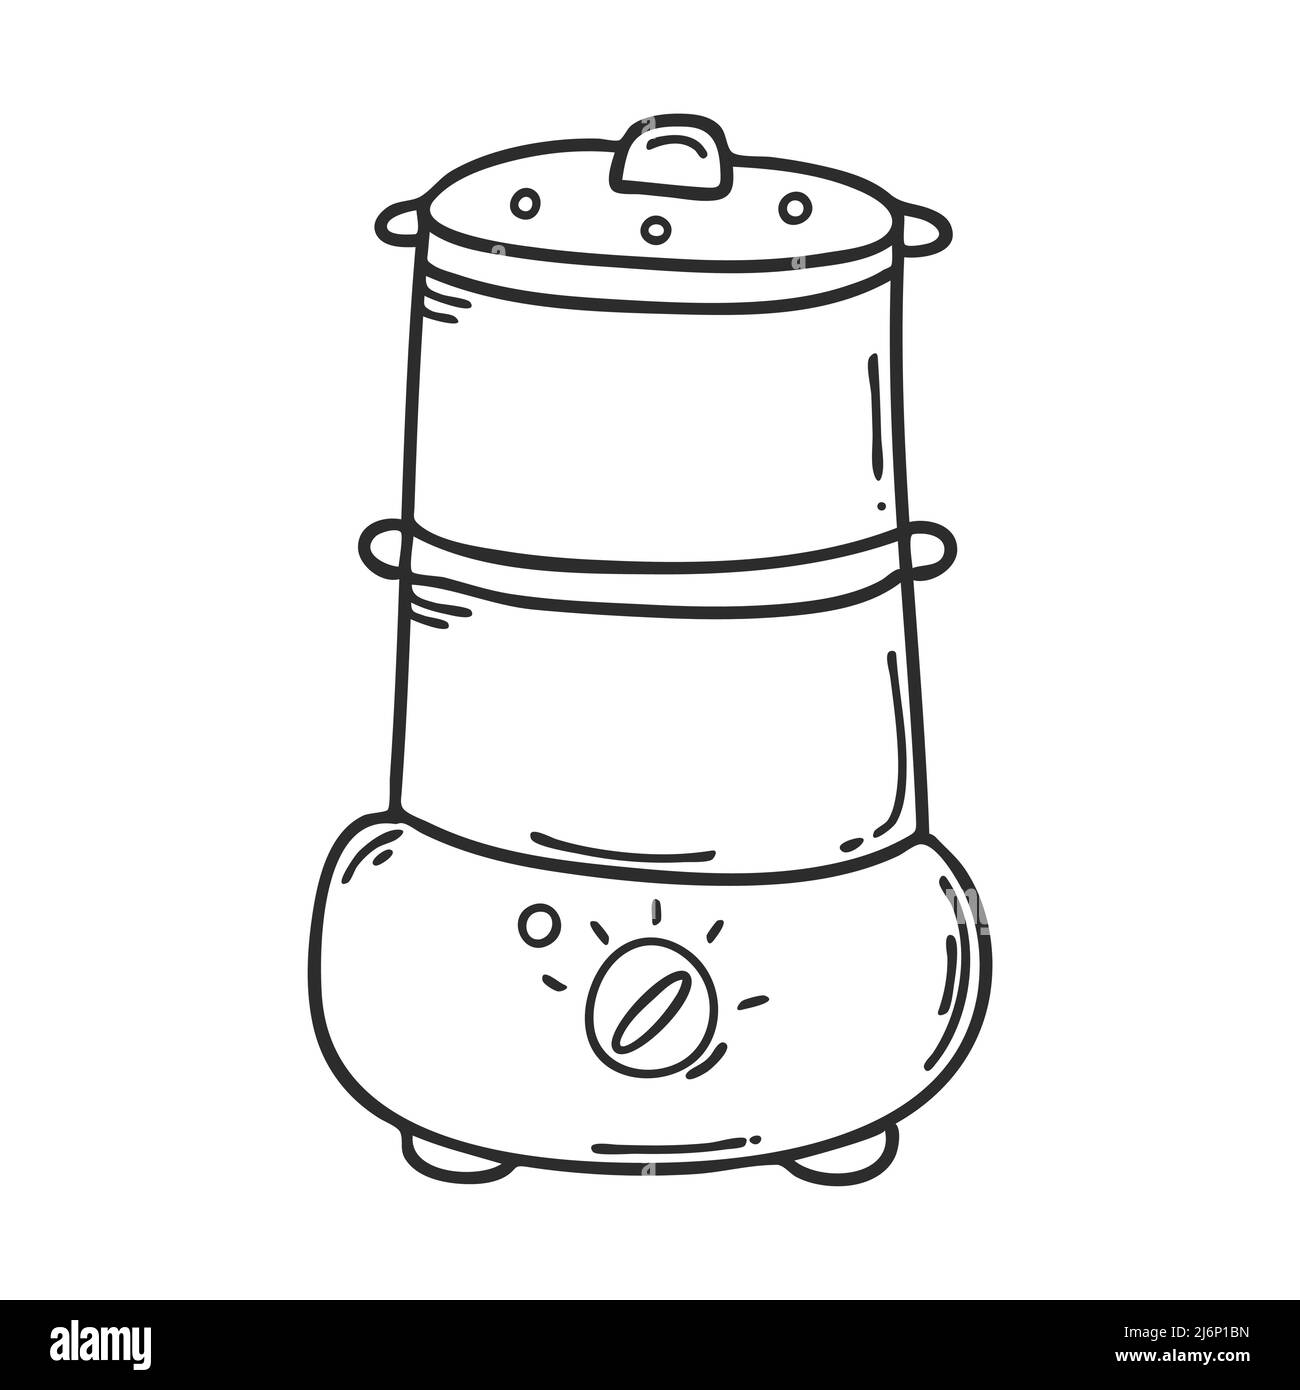 Electro cooker, double boiler.Doodle. Home appliances for cooking steamed.Design element for the design of menus, recipes, packaging for food. Hand dr Stock Vector